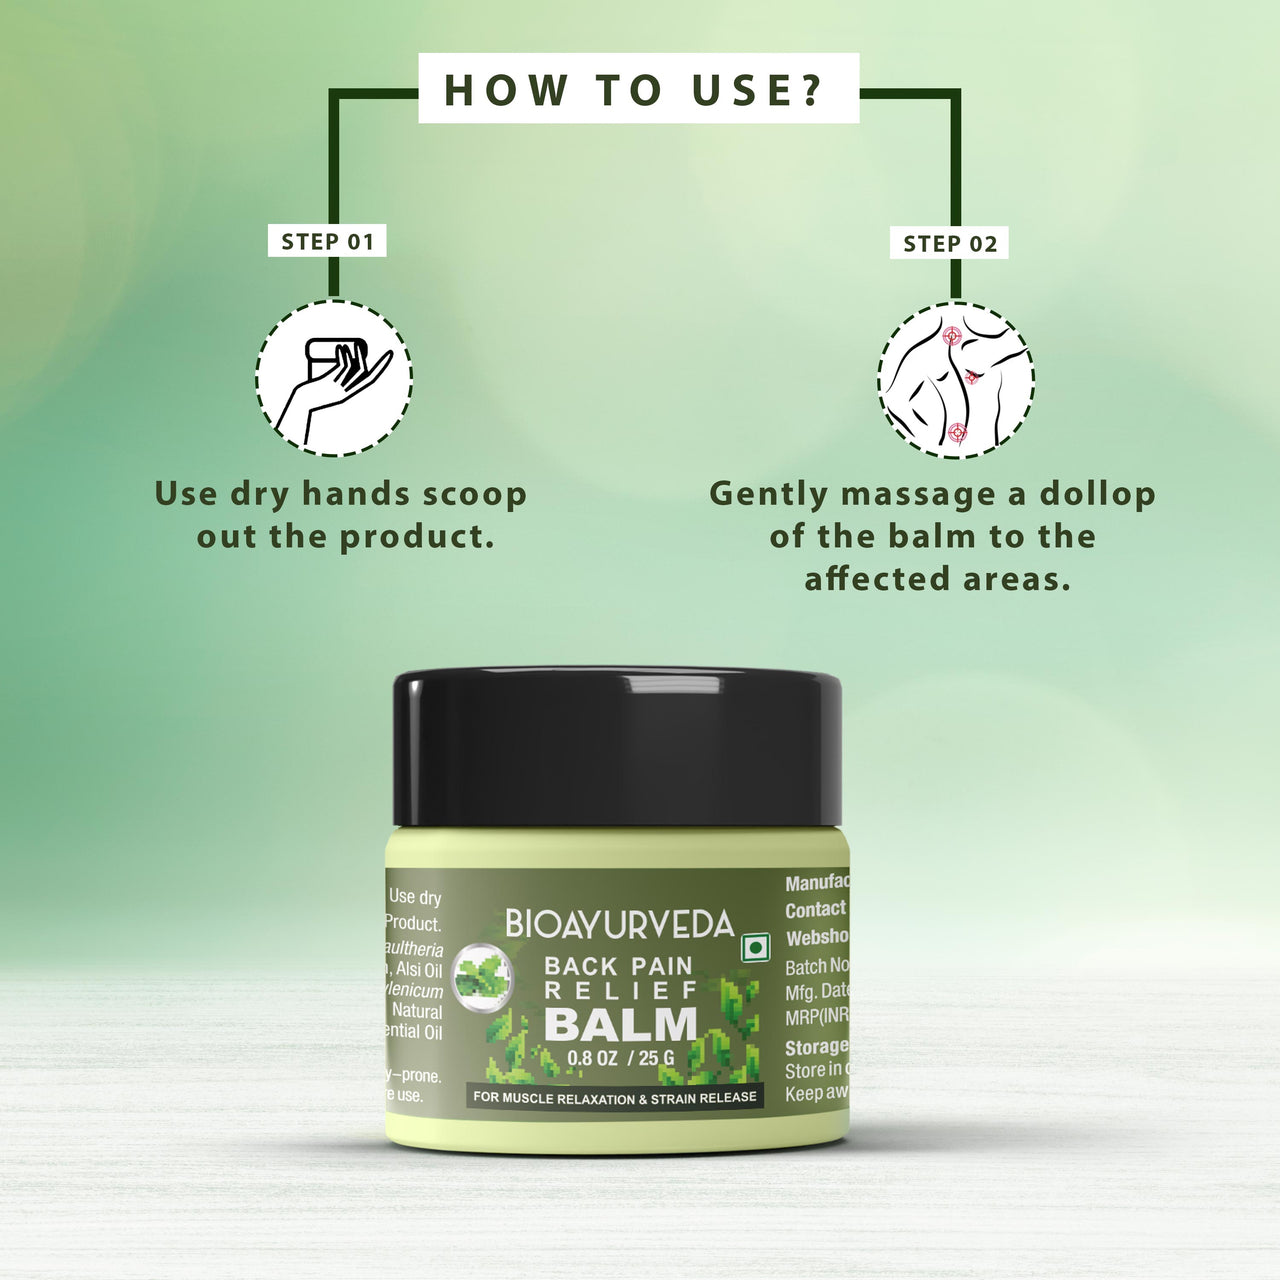 How to Use Back Pain Balm